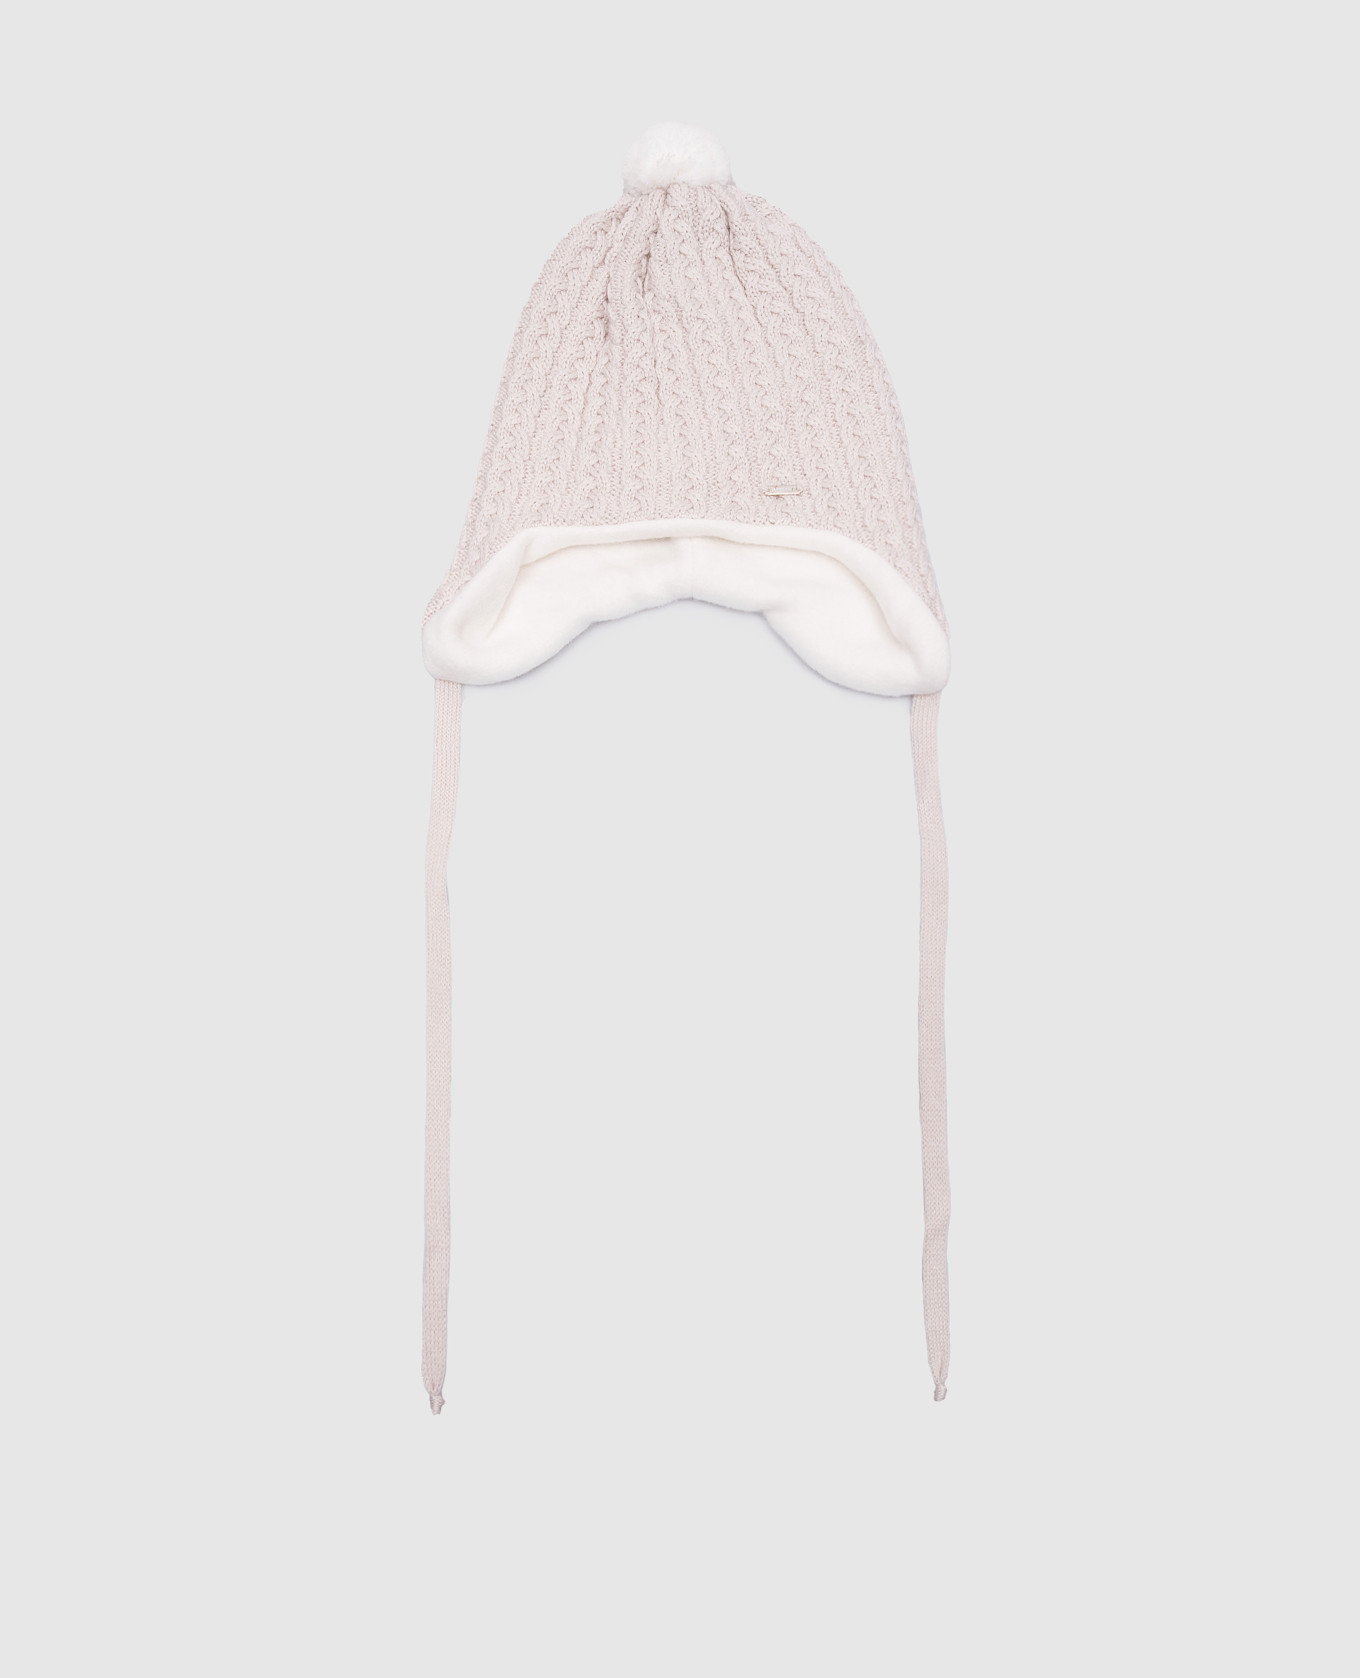 Children's beige hat made of wool with a textured pattern